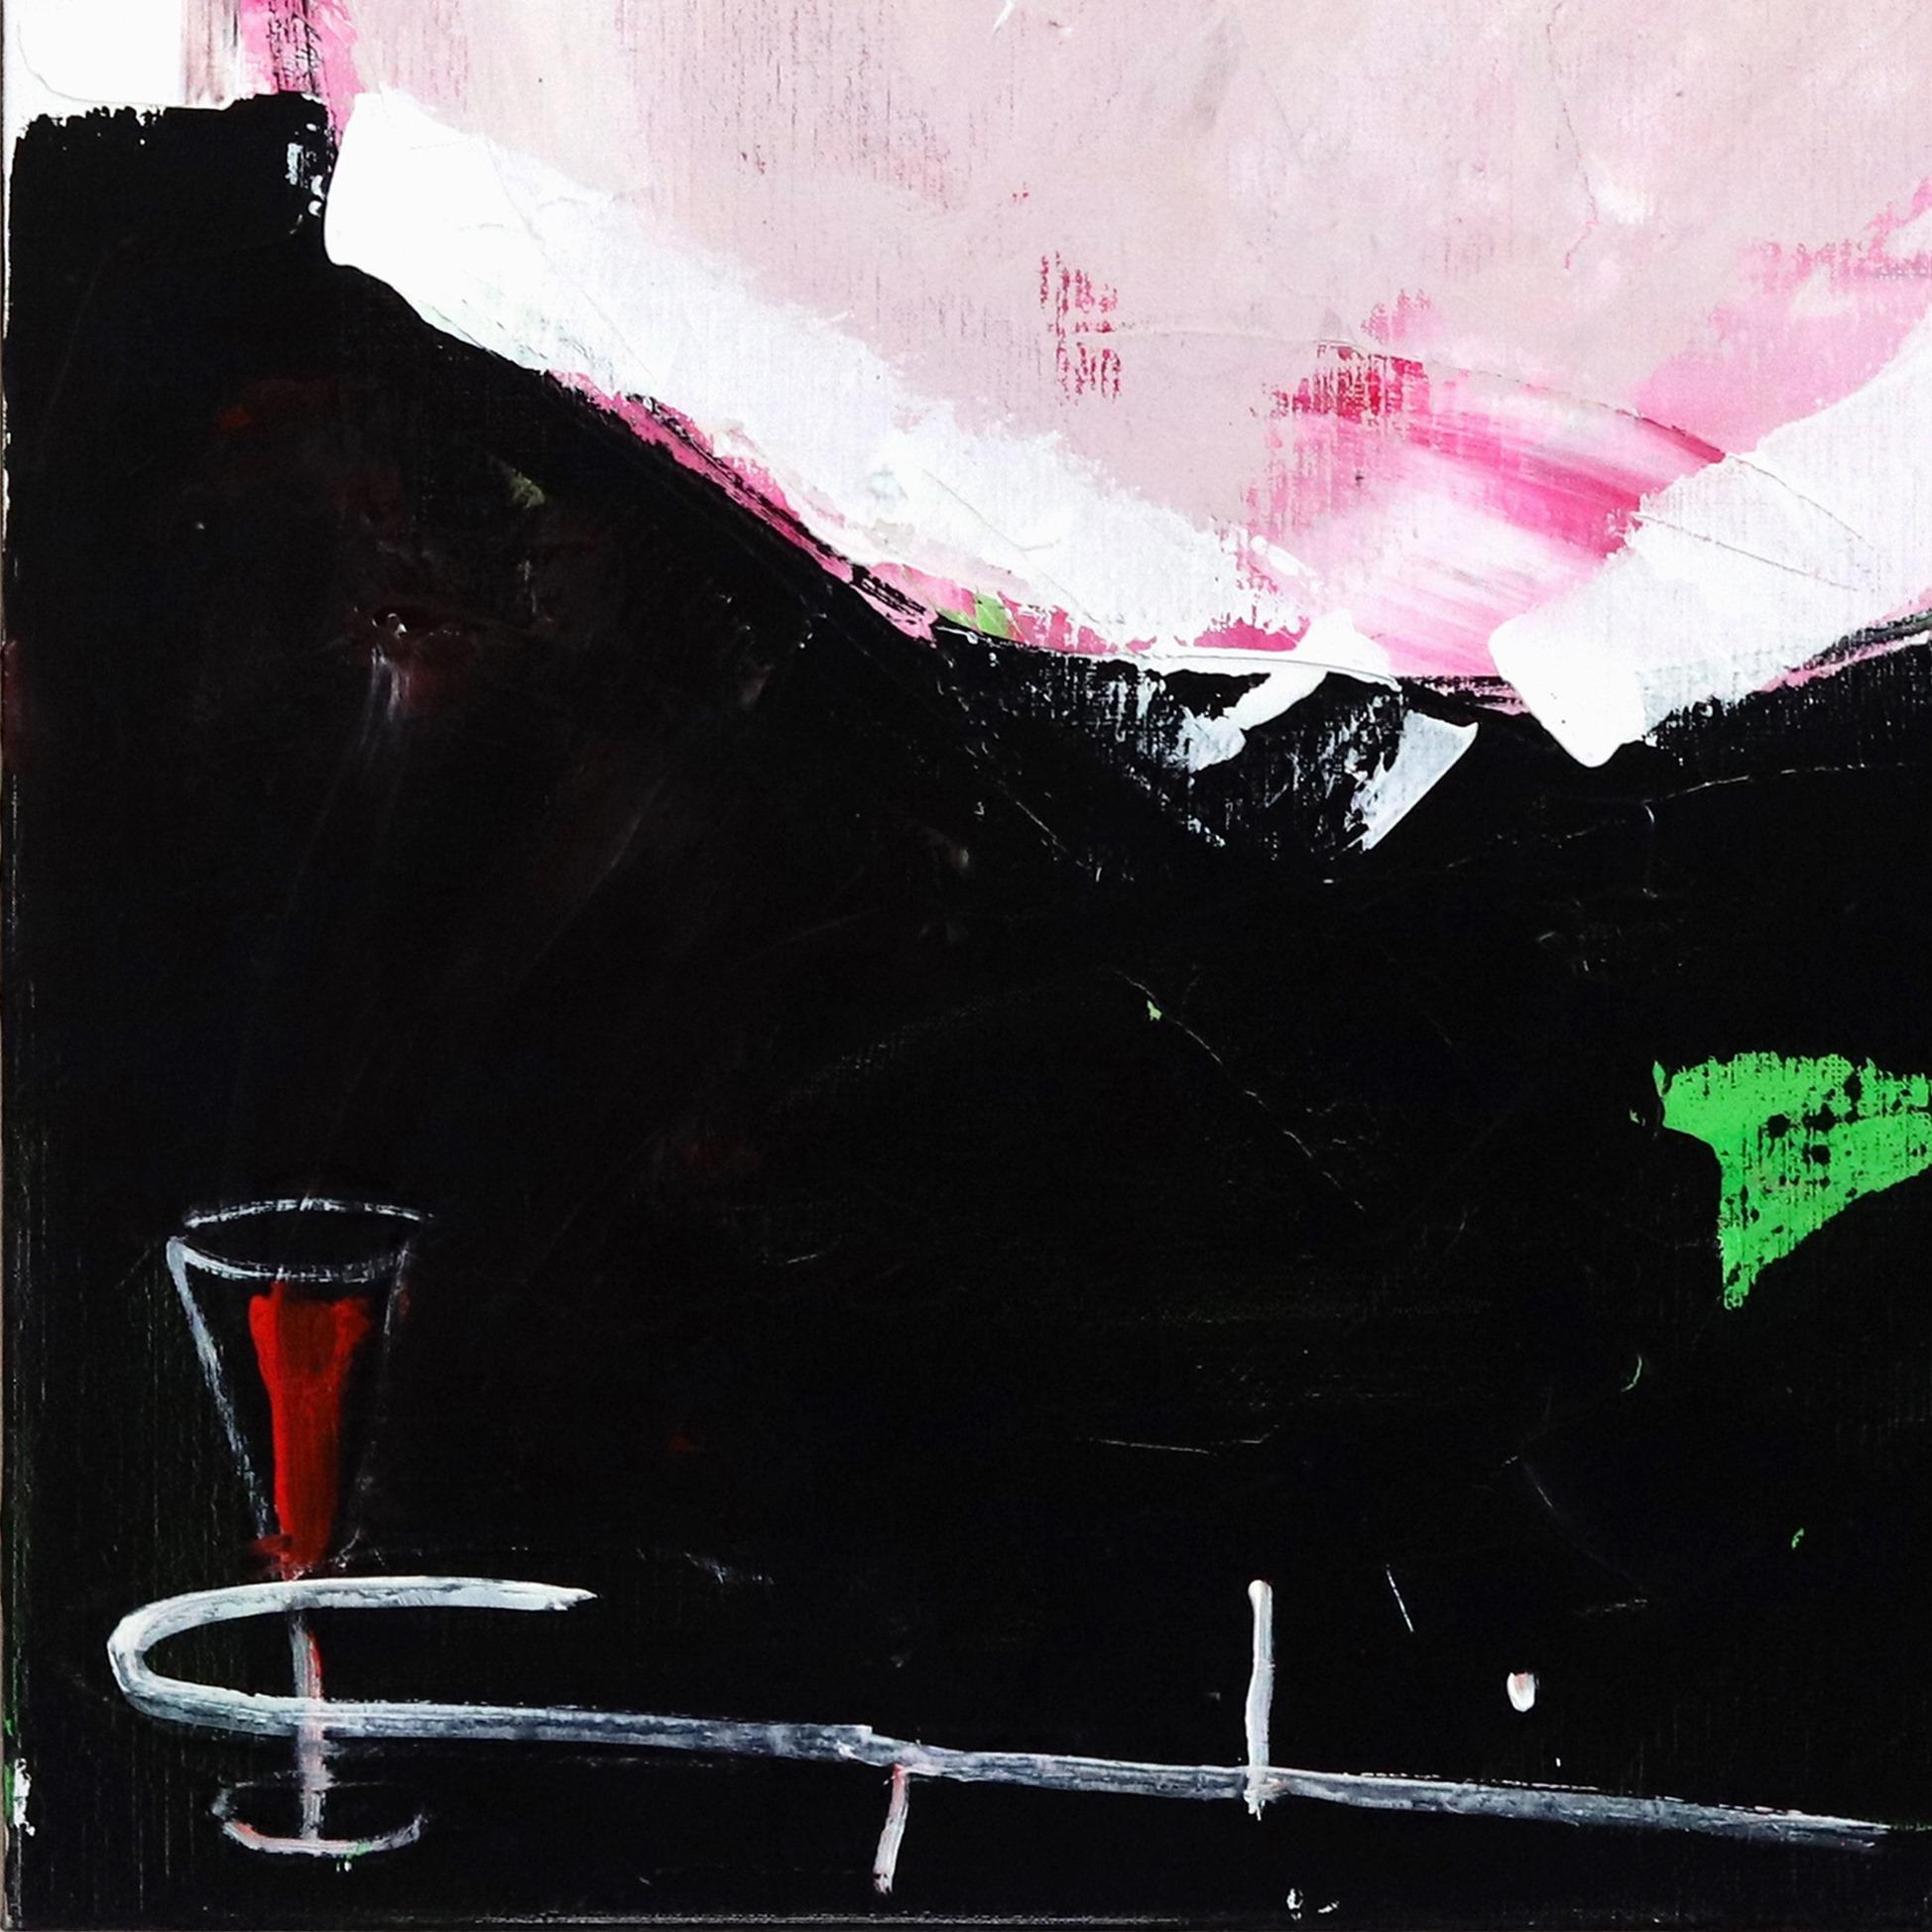 Take Life the Way It Is - Evocative Figures Celebrating Life with a Drink - Black Figurative Painting by Gerdine Duijsens